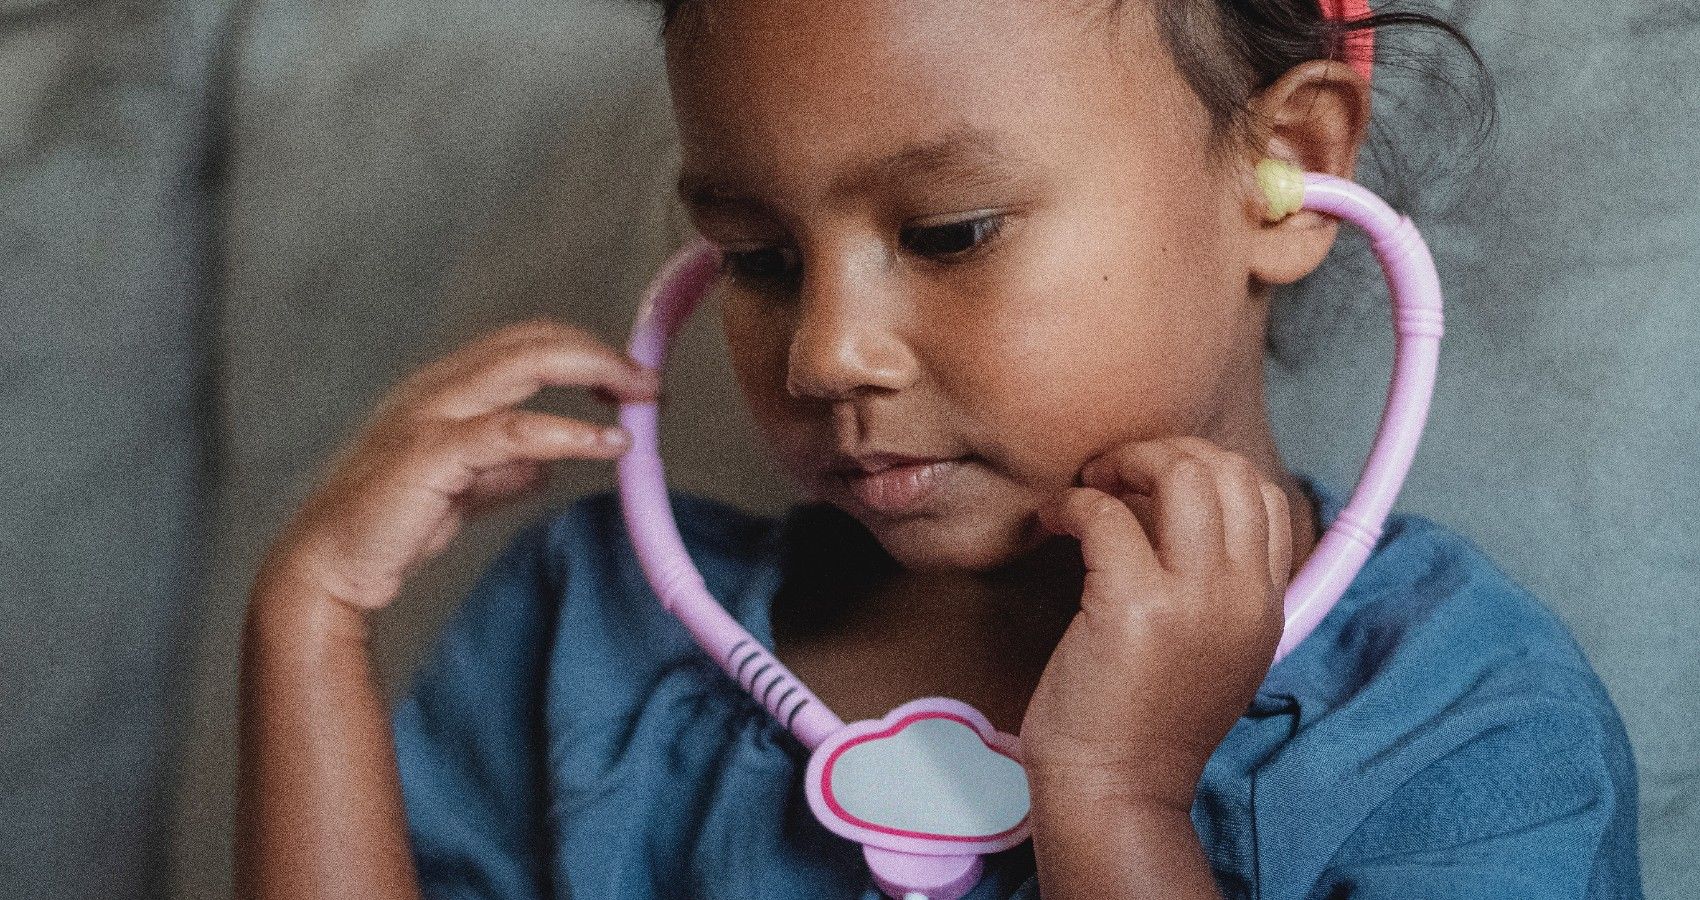 A child with a toy stethoscope